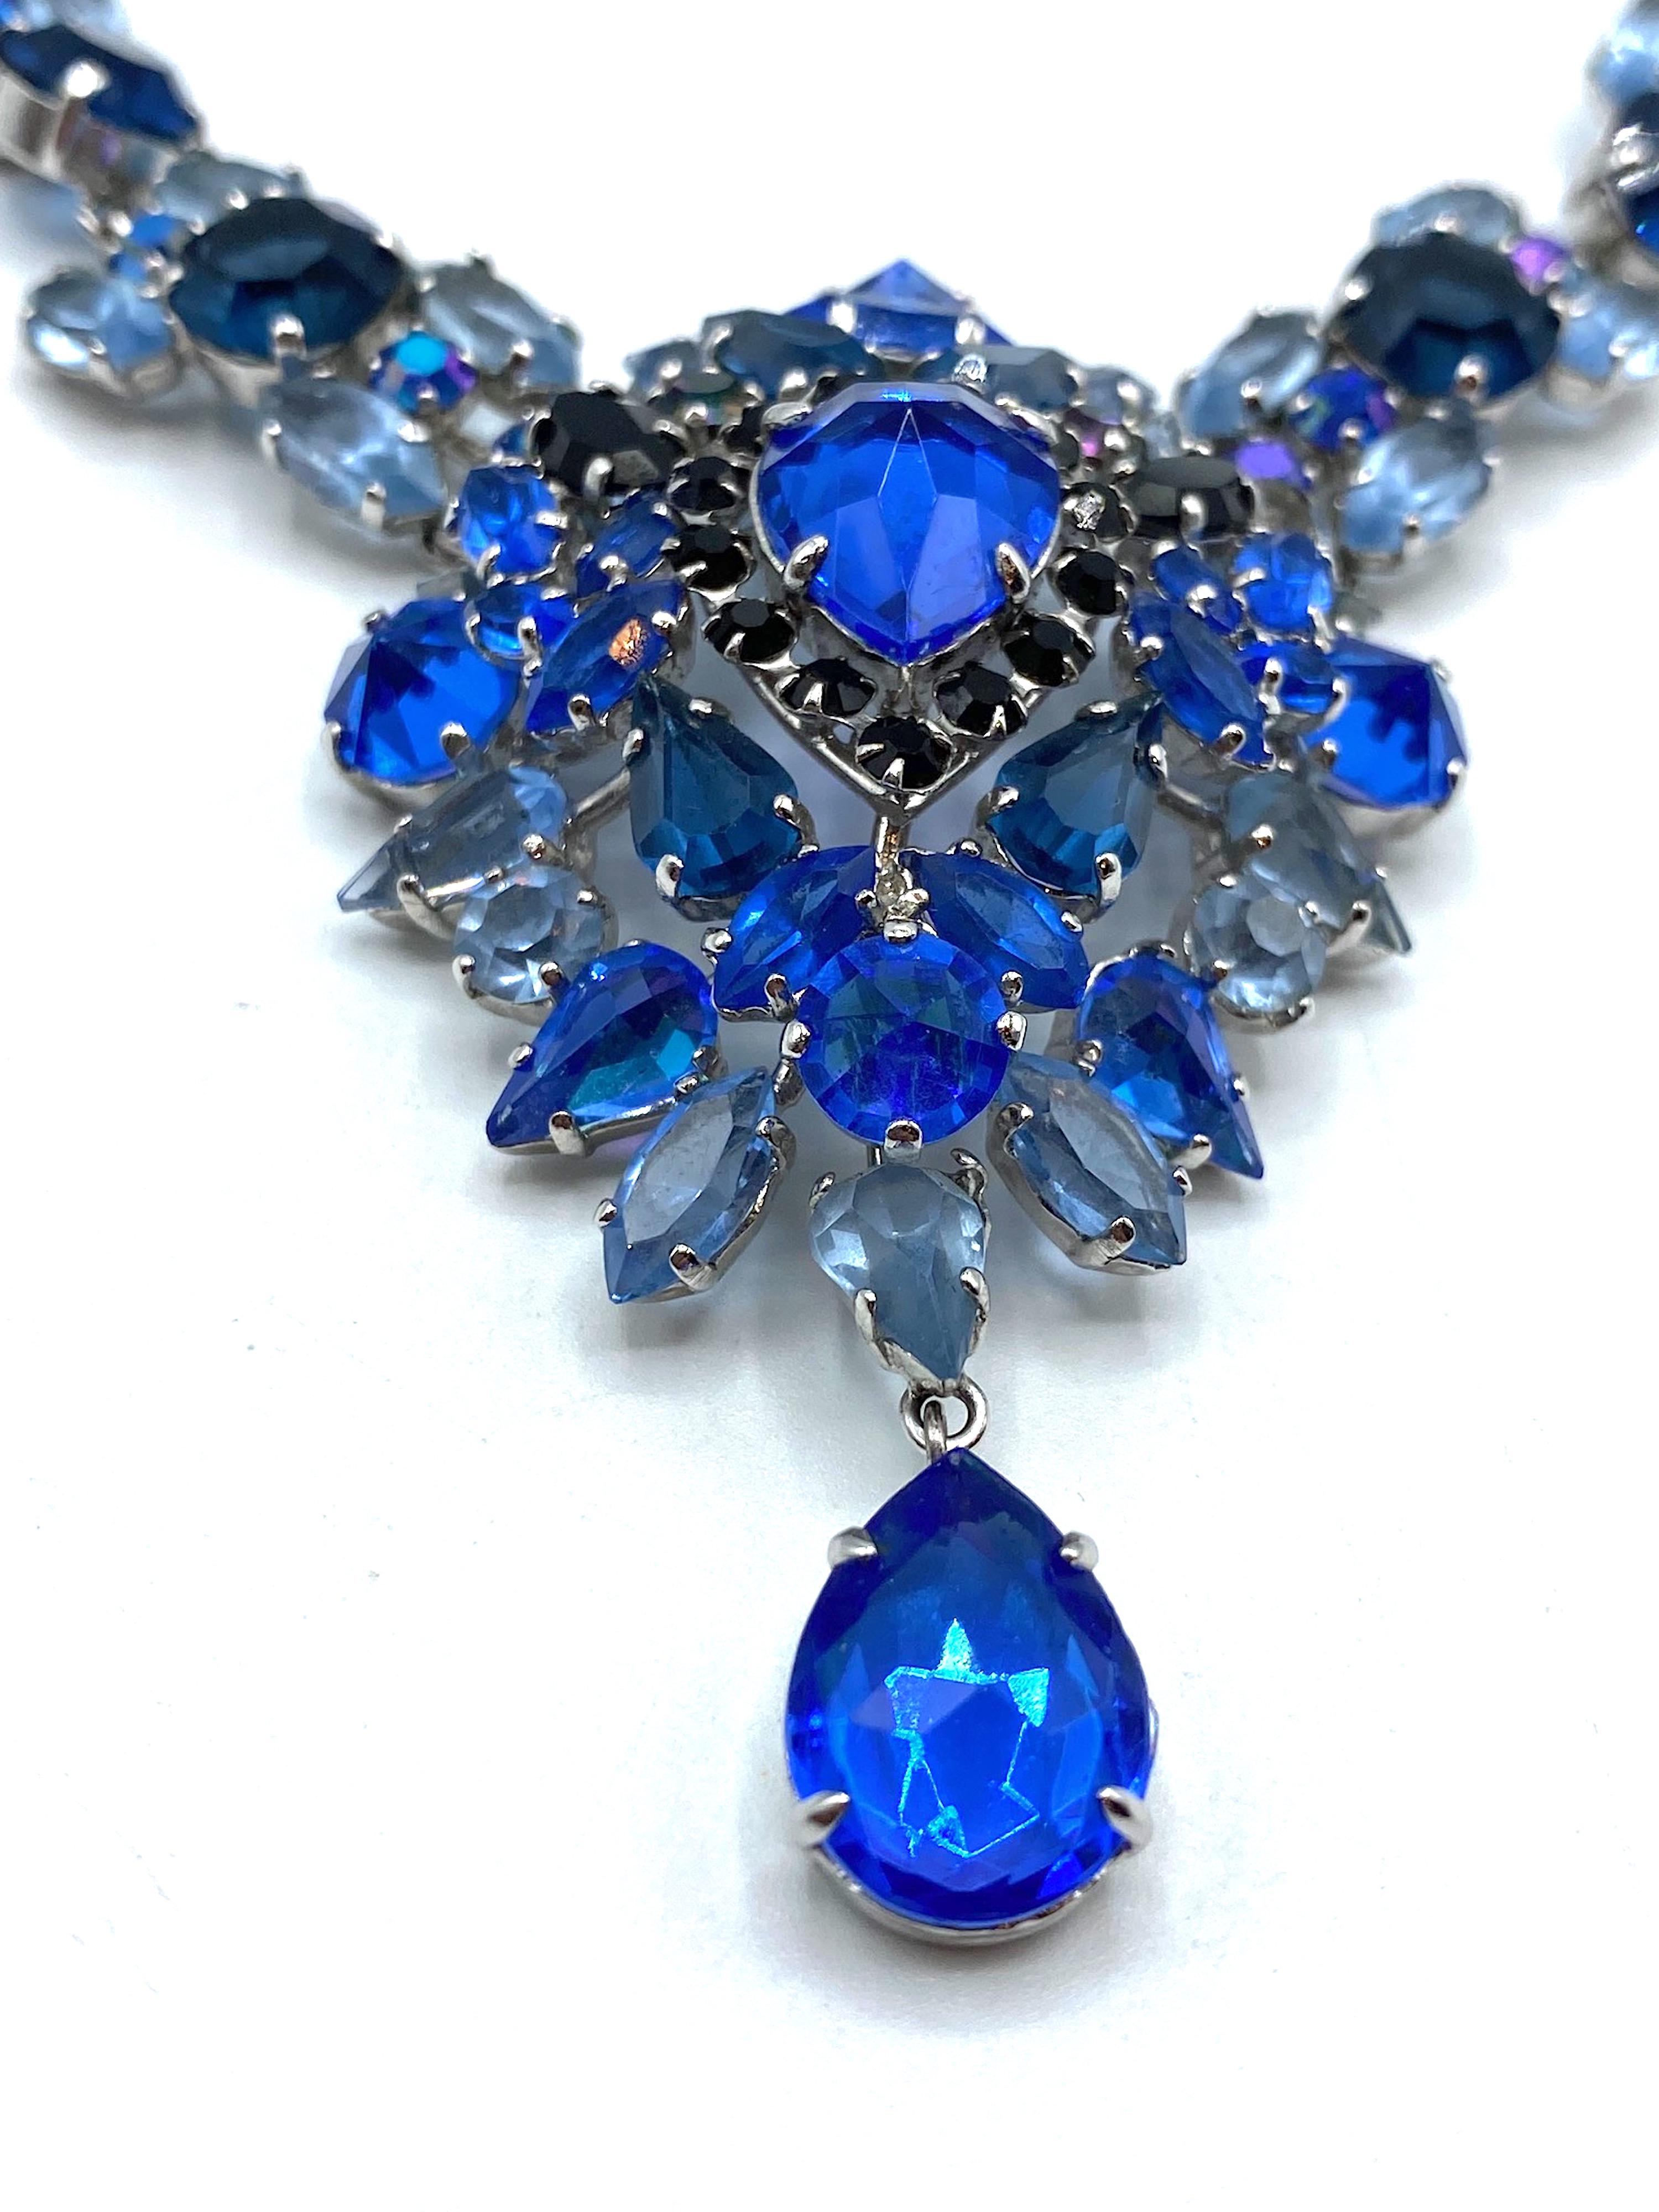 Christian Dior 1959 Shades of Blue Rhinestone Necklace by Henkel & Grosse' 4